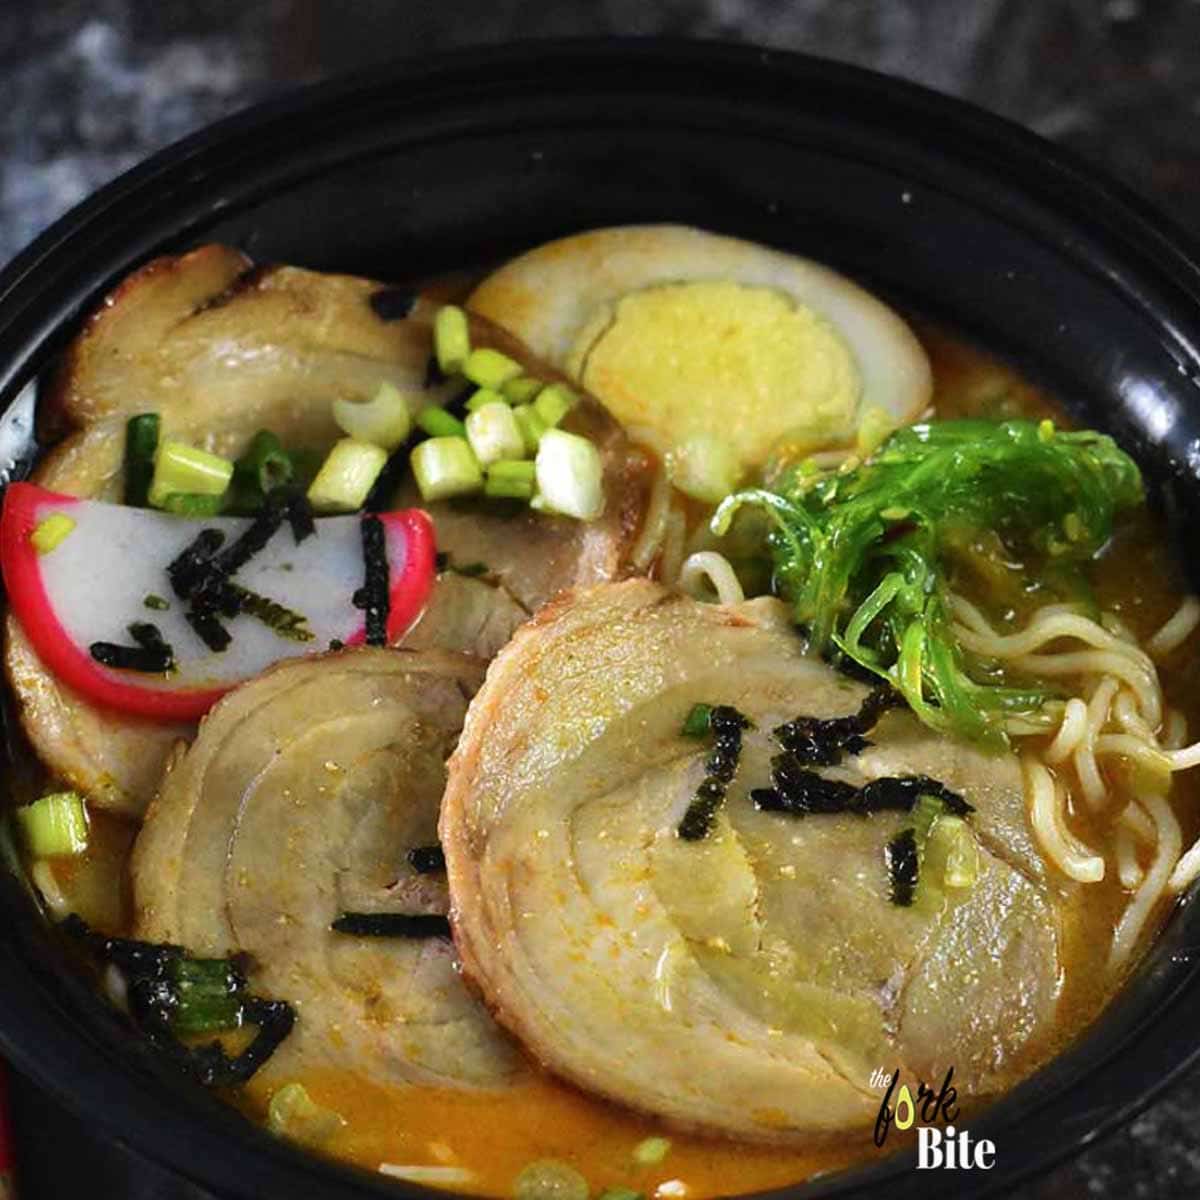 This Chasu Pork has the sweet-savory skin that will melt in your mouth and this succulent meat will fall apart with the slightest bite, adding a punch of flavor to the ramen noodles soup.